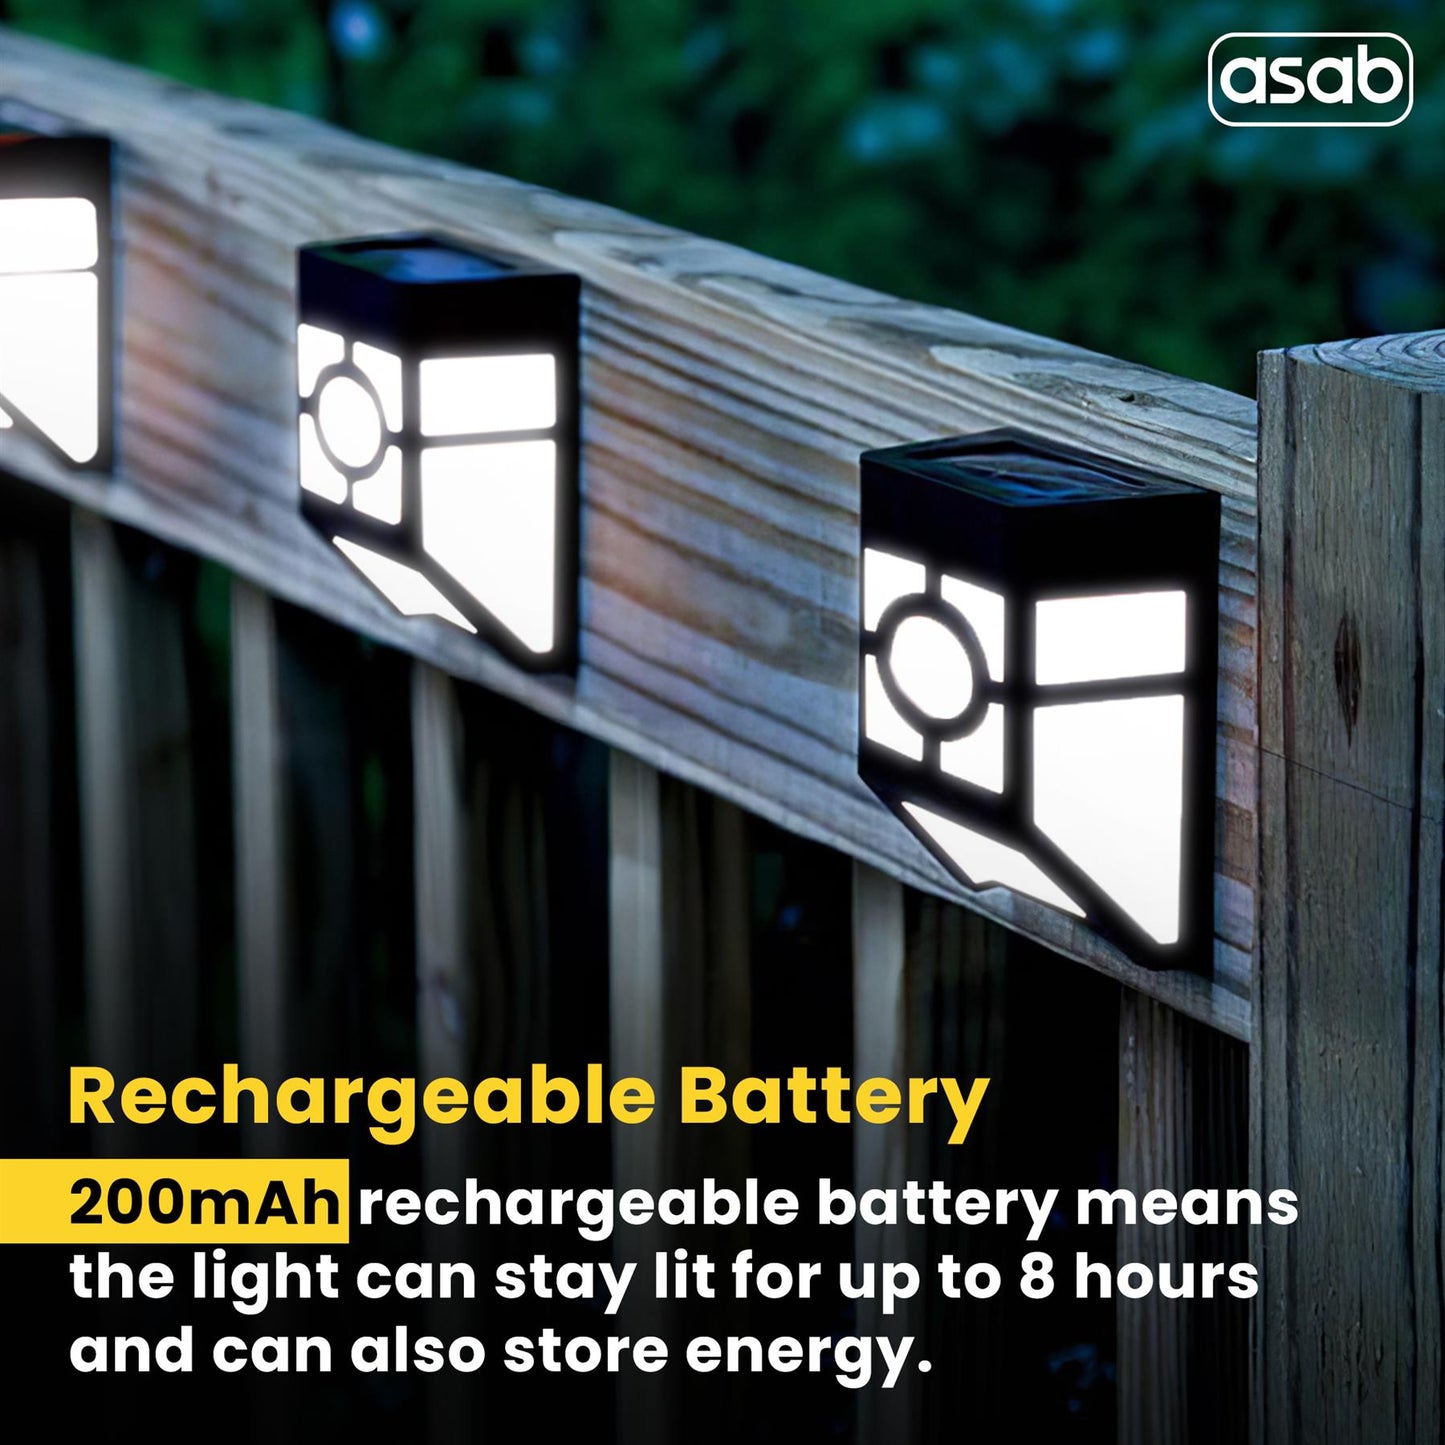 Brighten Up Your Garden with Solar-Powered Fence Lights